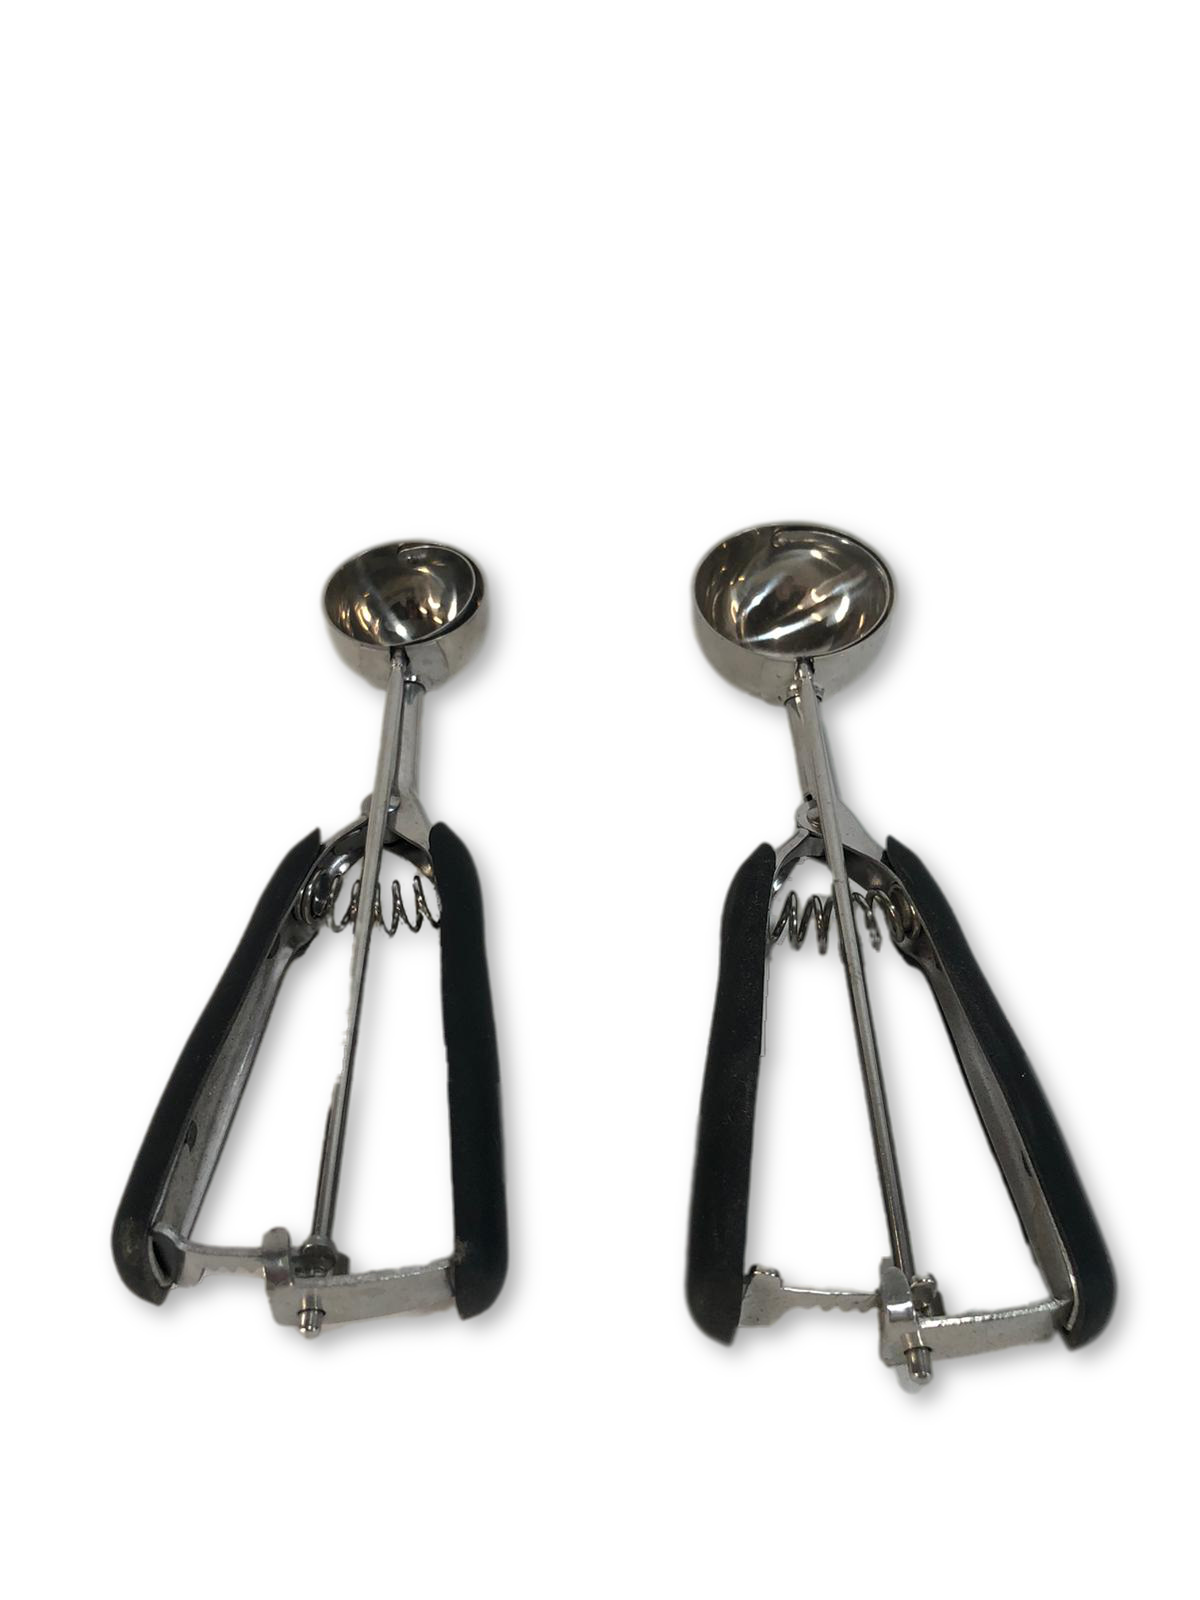 "As is" Set of 2 Multi-Purpose Scoops with Soft Grip Handles